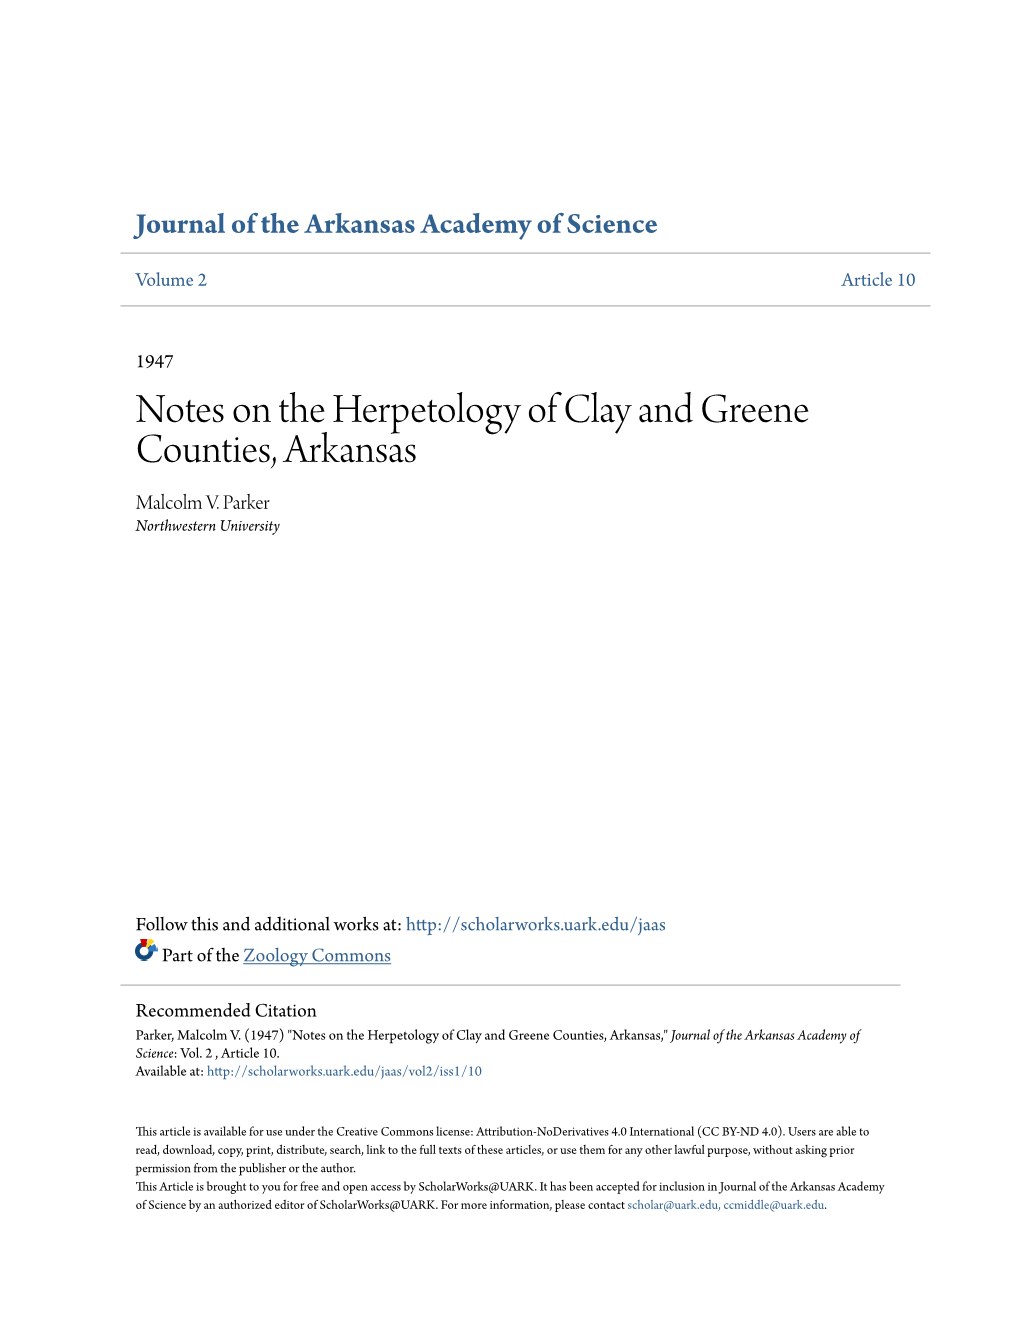 Notes on the Herpetology of Clay and Greene Counties, Arkansas Malcolm V